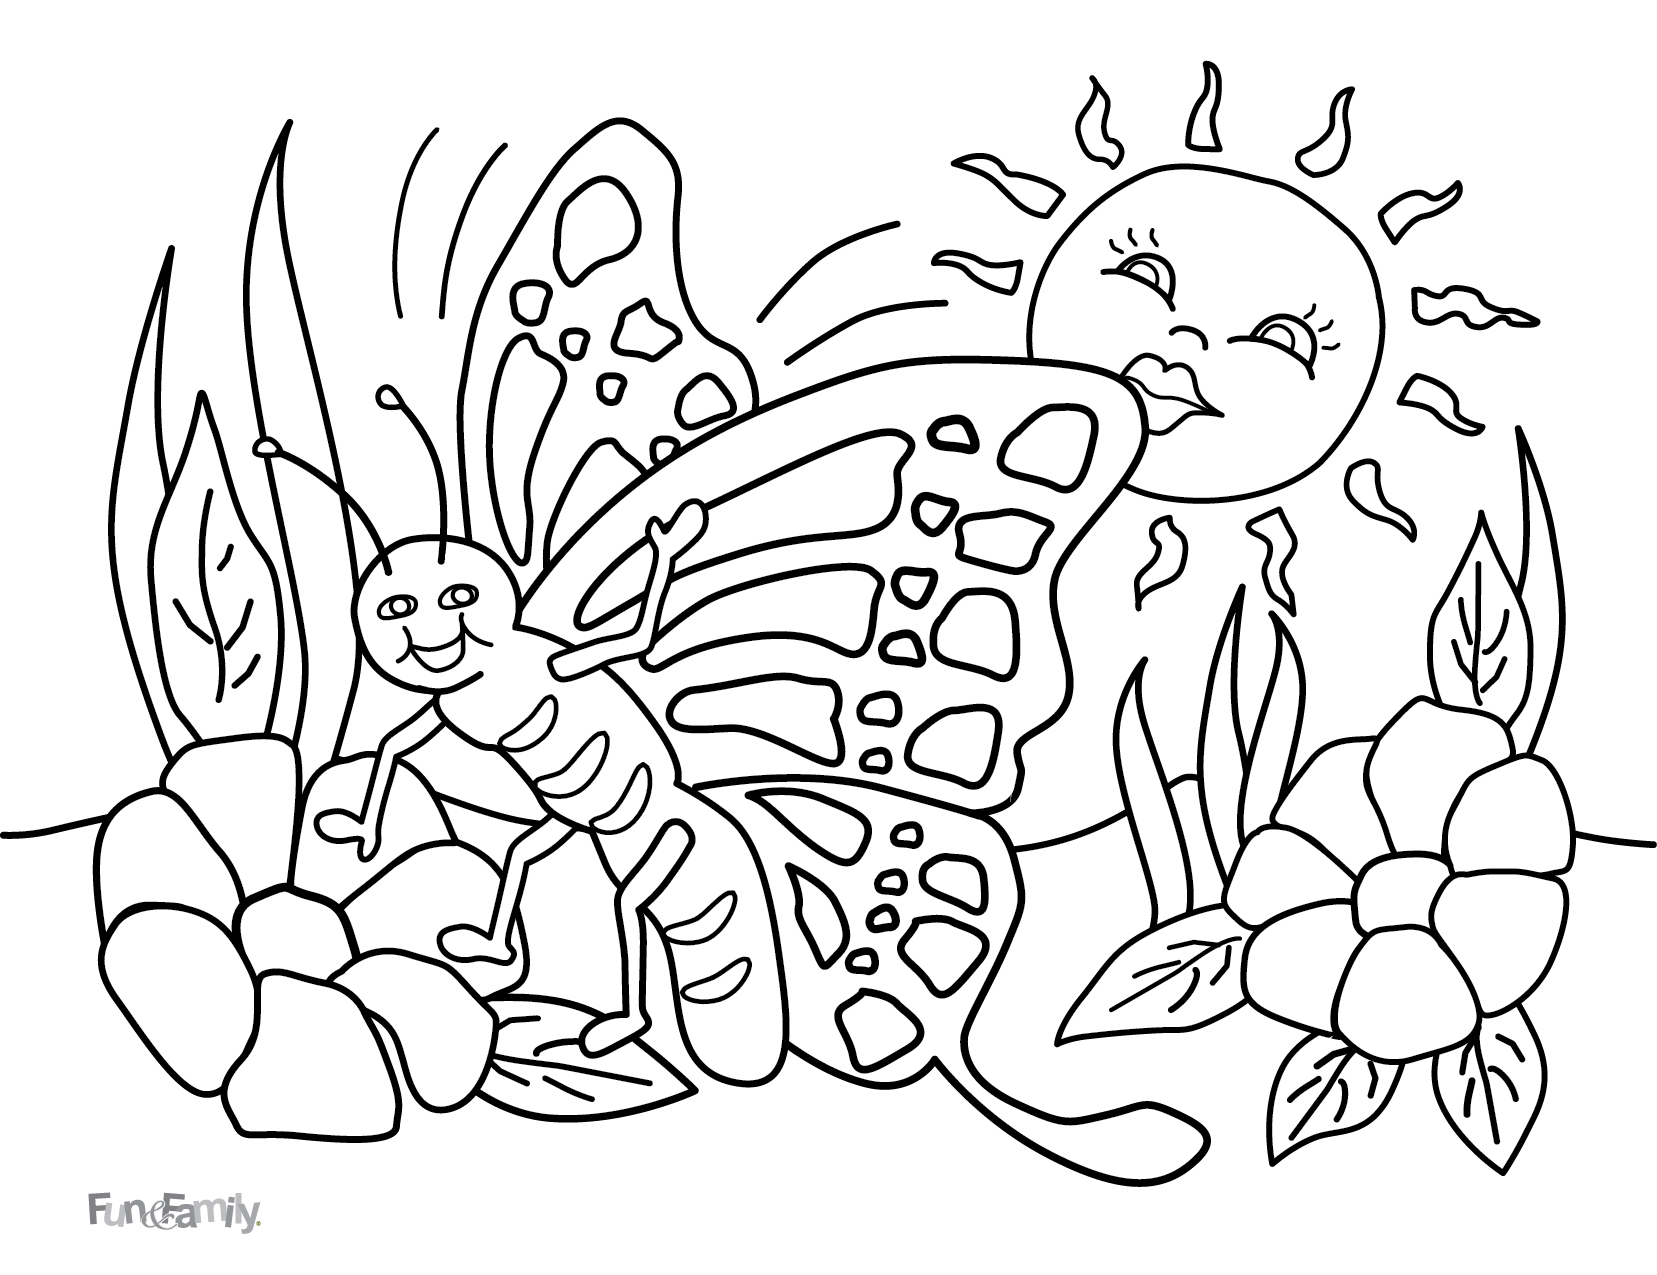 Coloring Pages Pdf at GetColorings.com | Free printable colorings pages